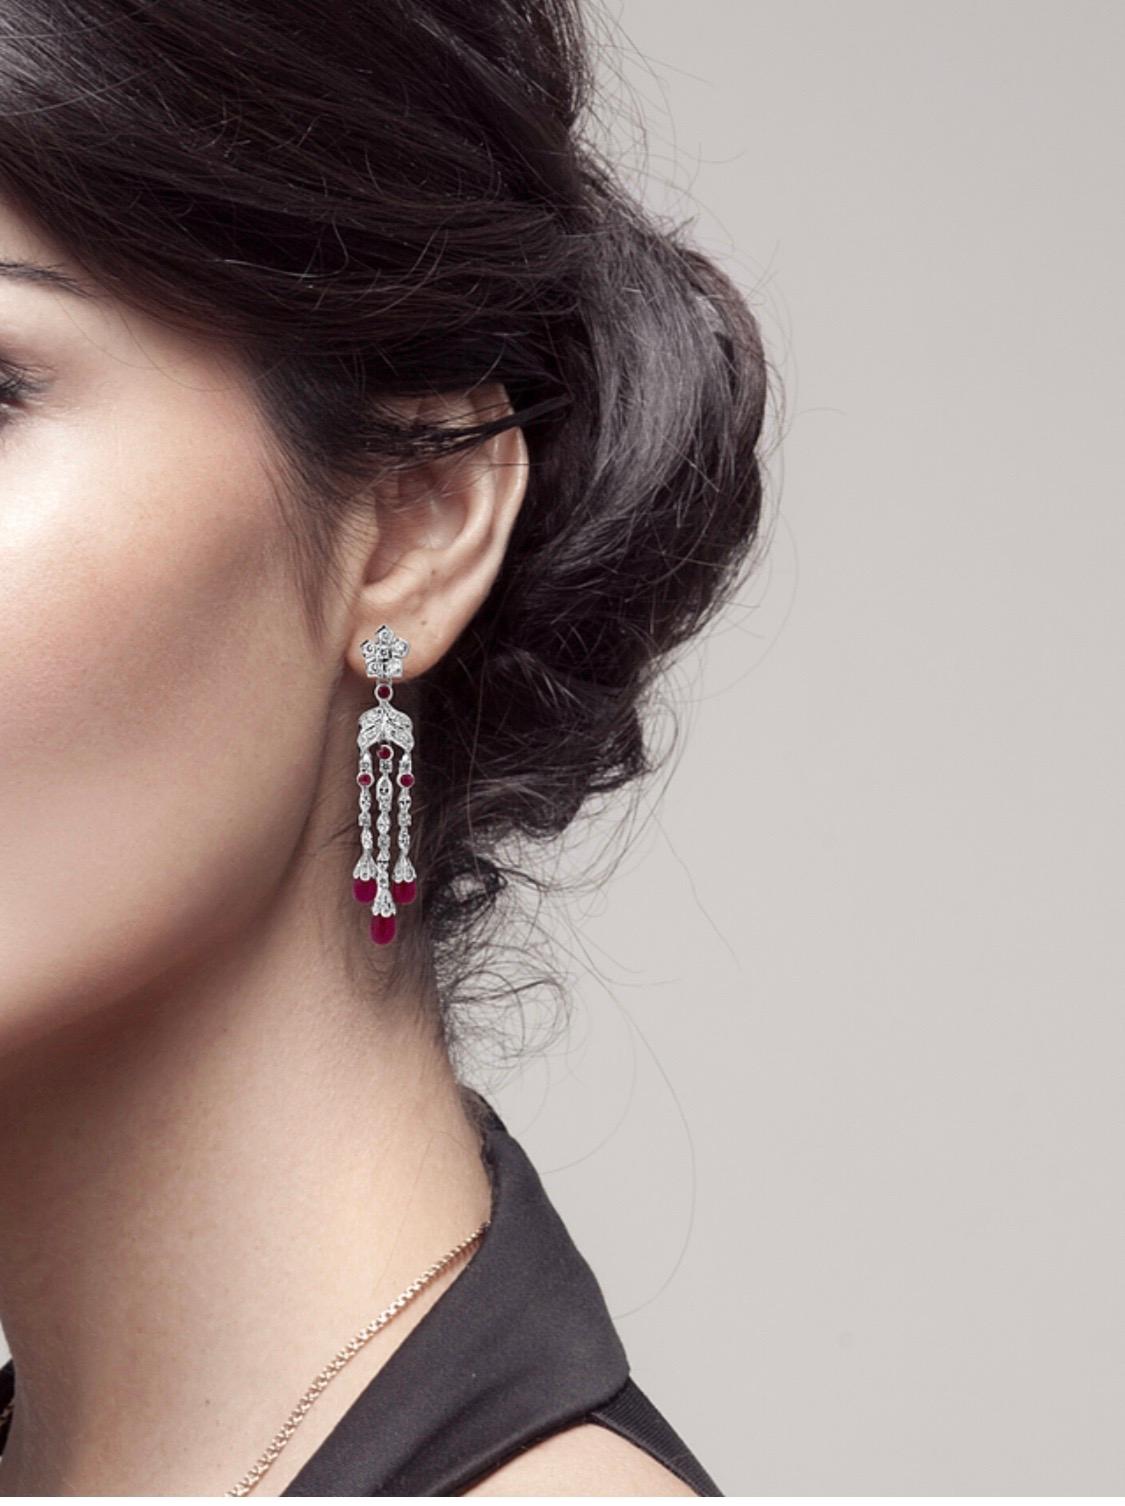 The Jacqueline 
An art deco inspired natural ruby earring, the Jacqueline features 27 carats of natural Burmese rubies with 5 carats of diamonds, and is set in 18K white gold.

Natural Ruby
Shape 	Cabochon Drop 
Color	Red
Clarity 	Fine 
Treatment,